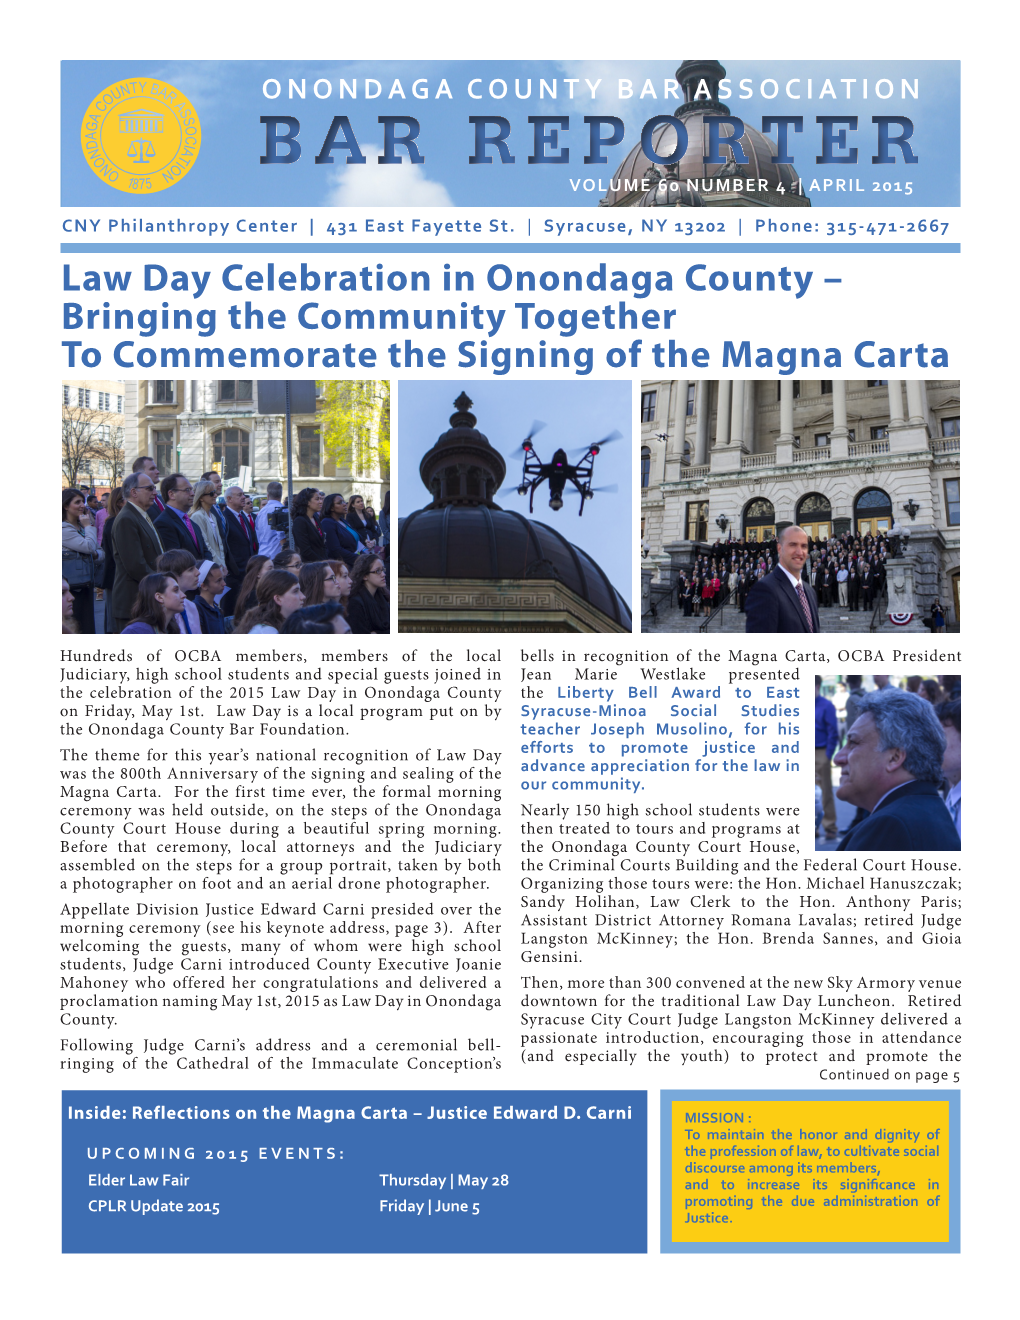 Law Day Celebration in Onondaga County – Bringing the Community Together to Commemorate the Signing of the Magna Carta